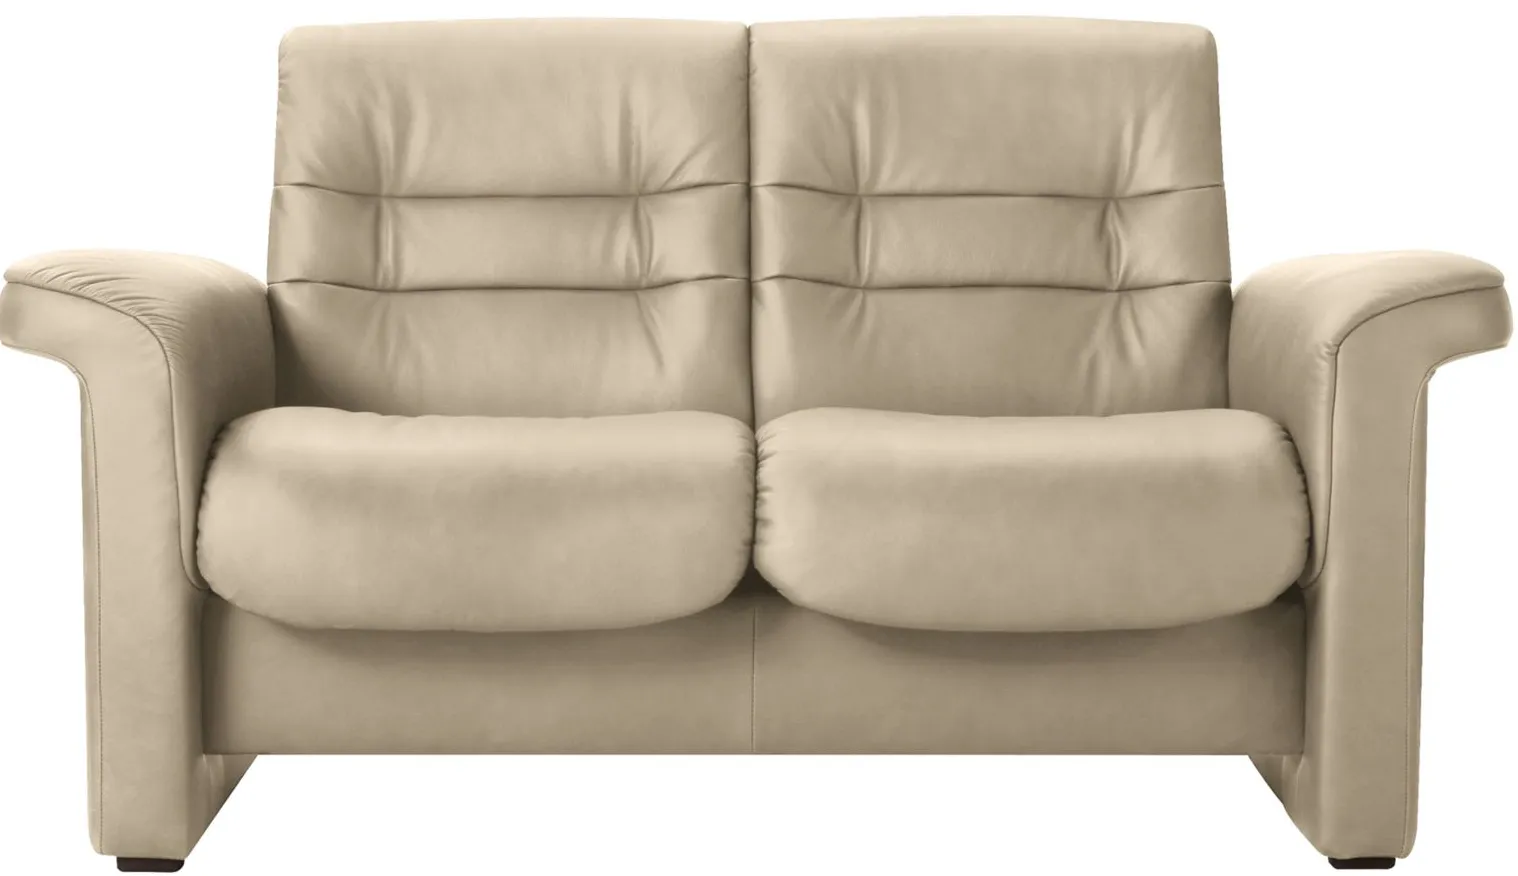 Stressless Sapphire Leather Reclining Low-Back Loveseat in Paloma Light Grey by Stressless